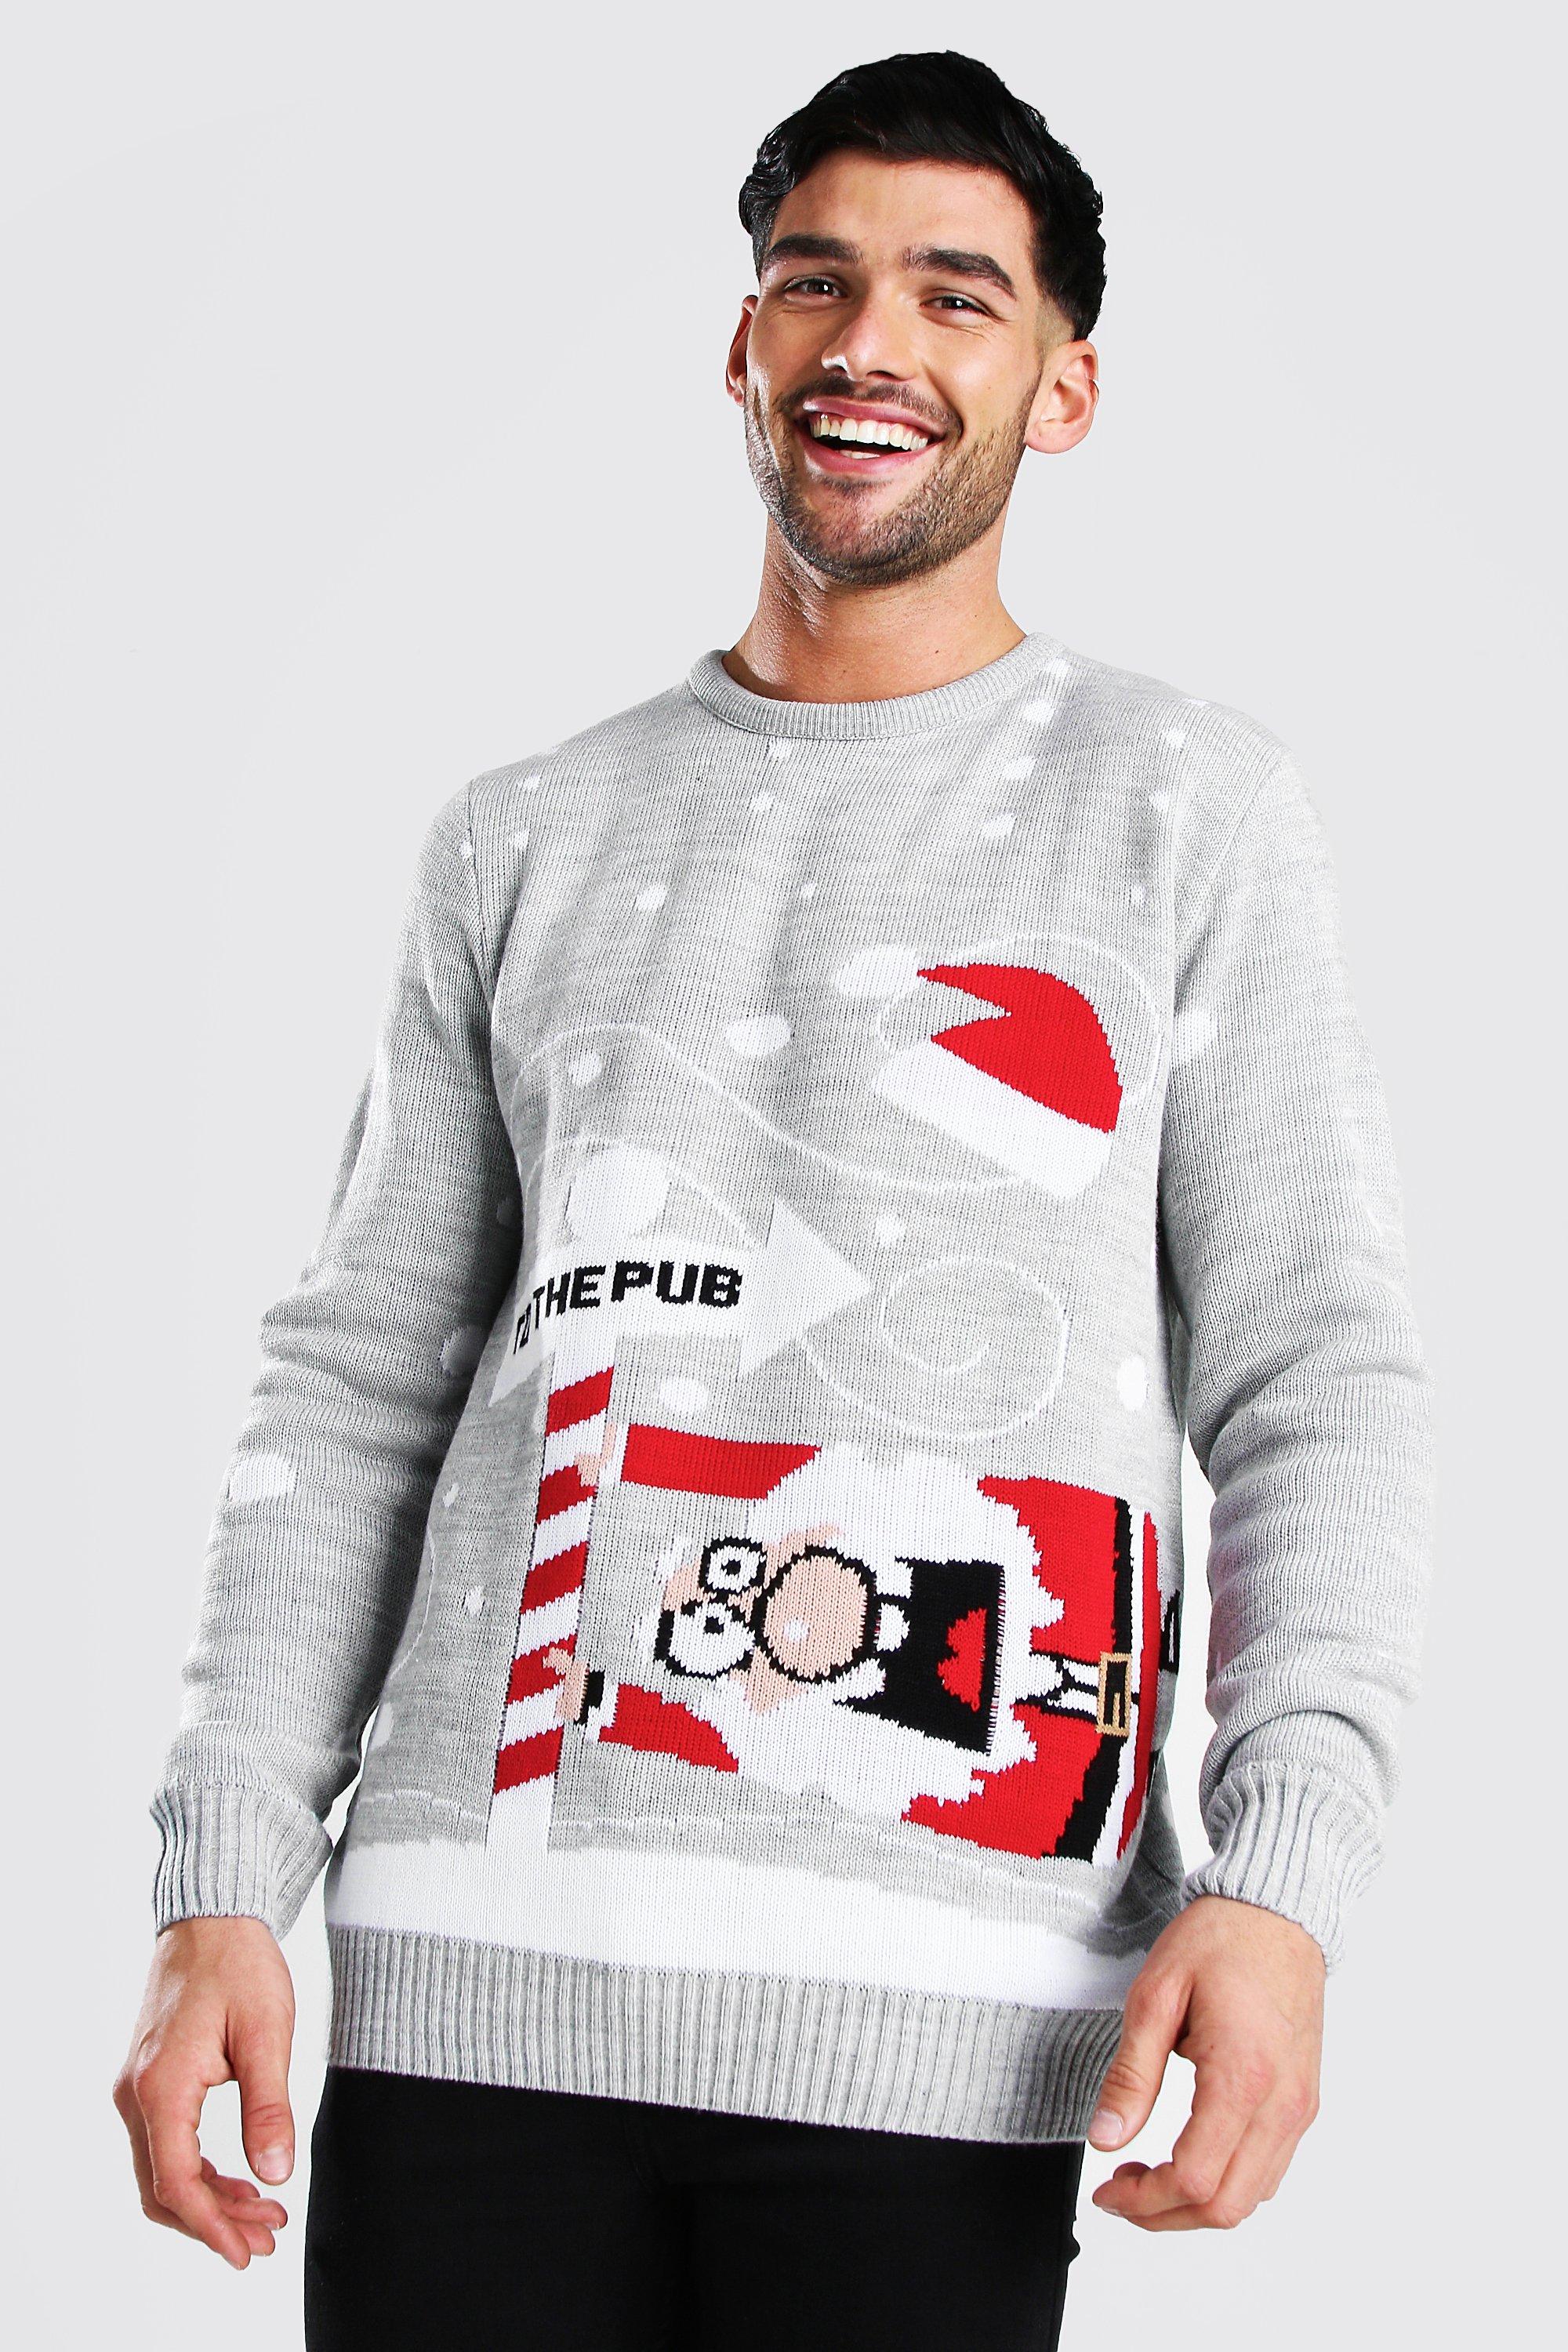 To The Pub Knitted Christmas Jumper | boohooMAN UK